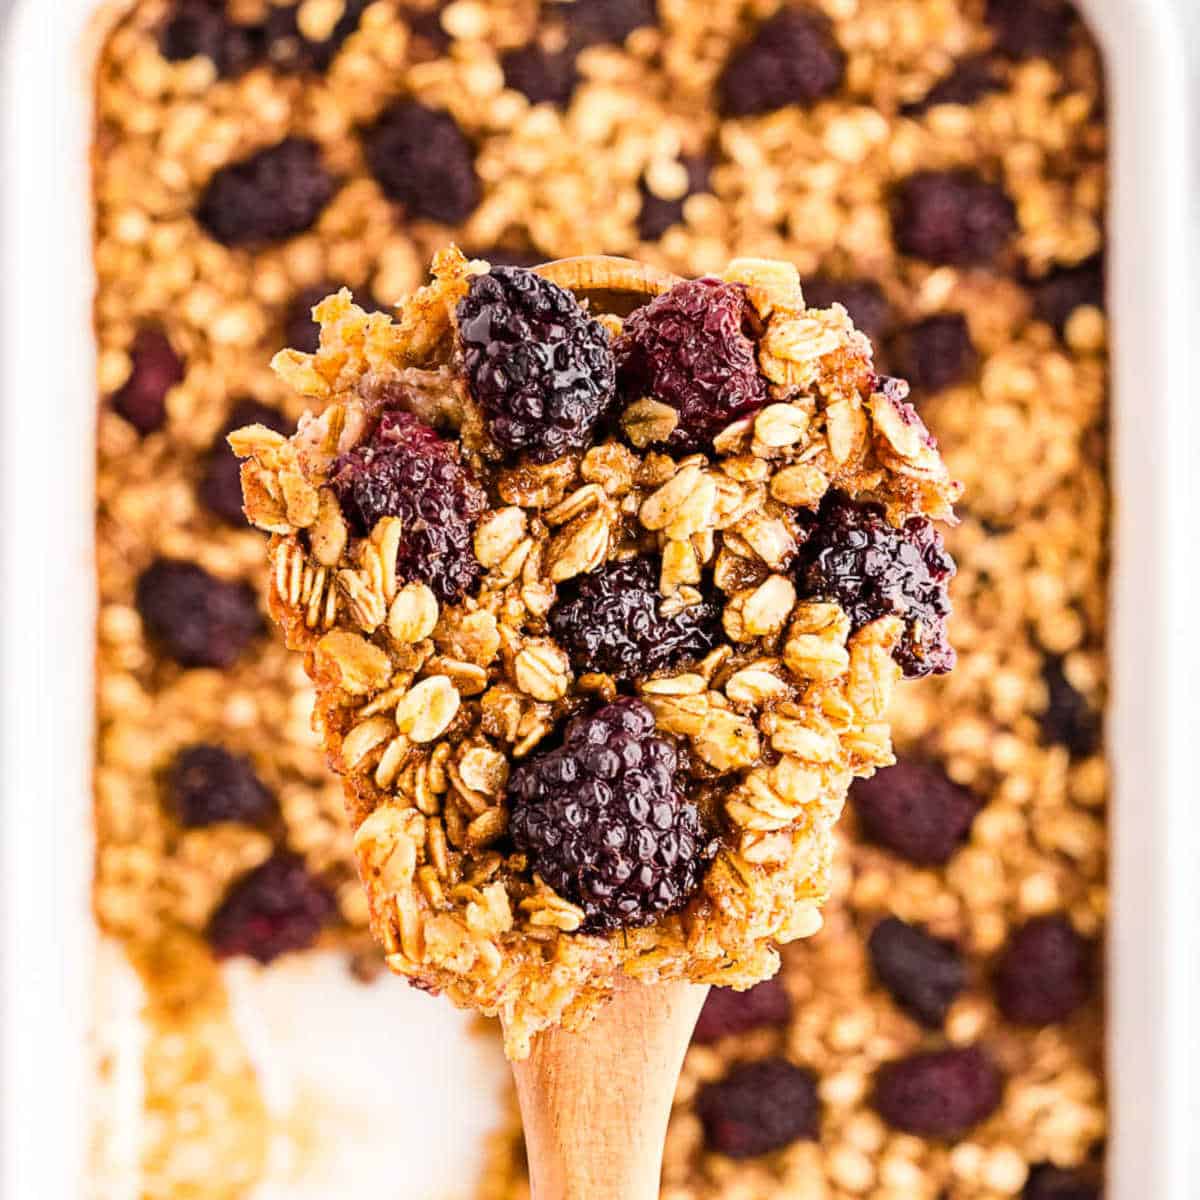 Easy Baked Oatmeal with Berries